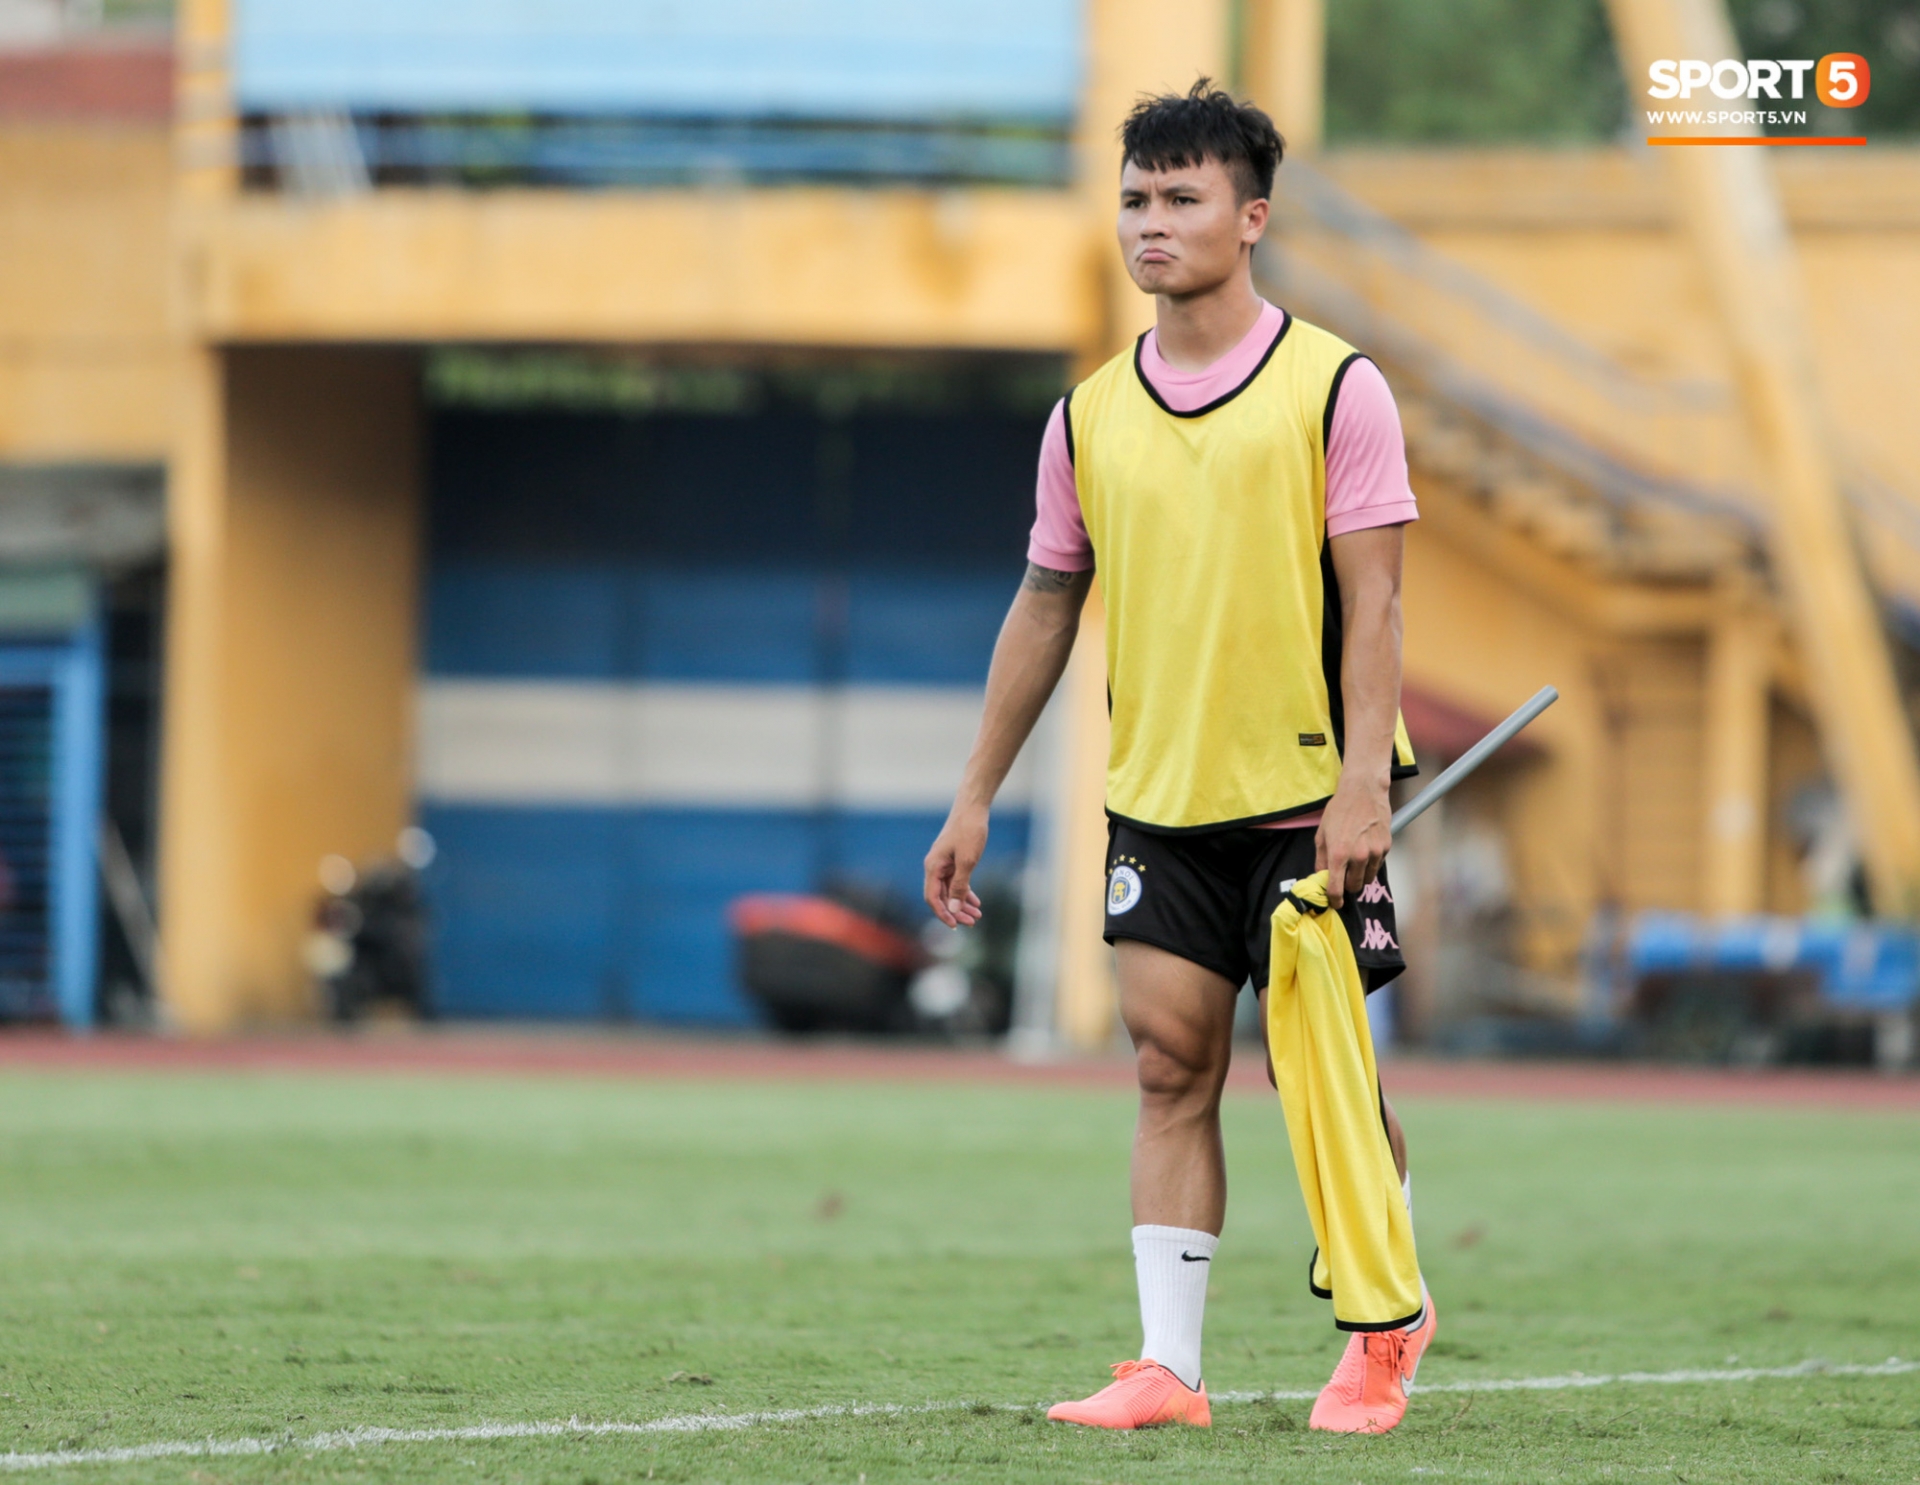  Quang Hai was assigned to act as a lineman in the opposing kick of the team. The 23-year-old midfielder is equipped with a homemade flag to do the task.